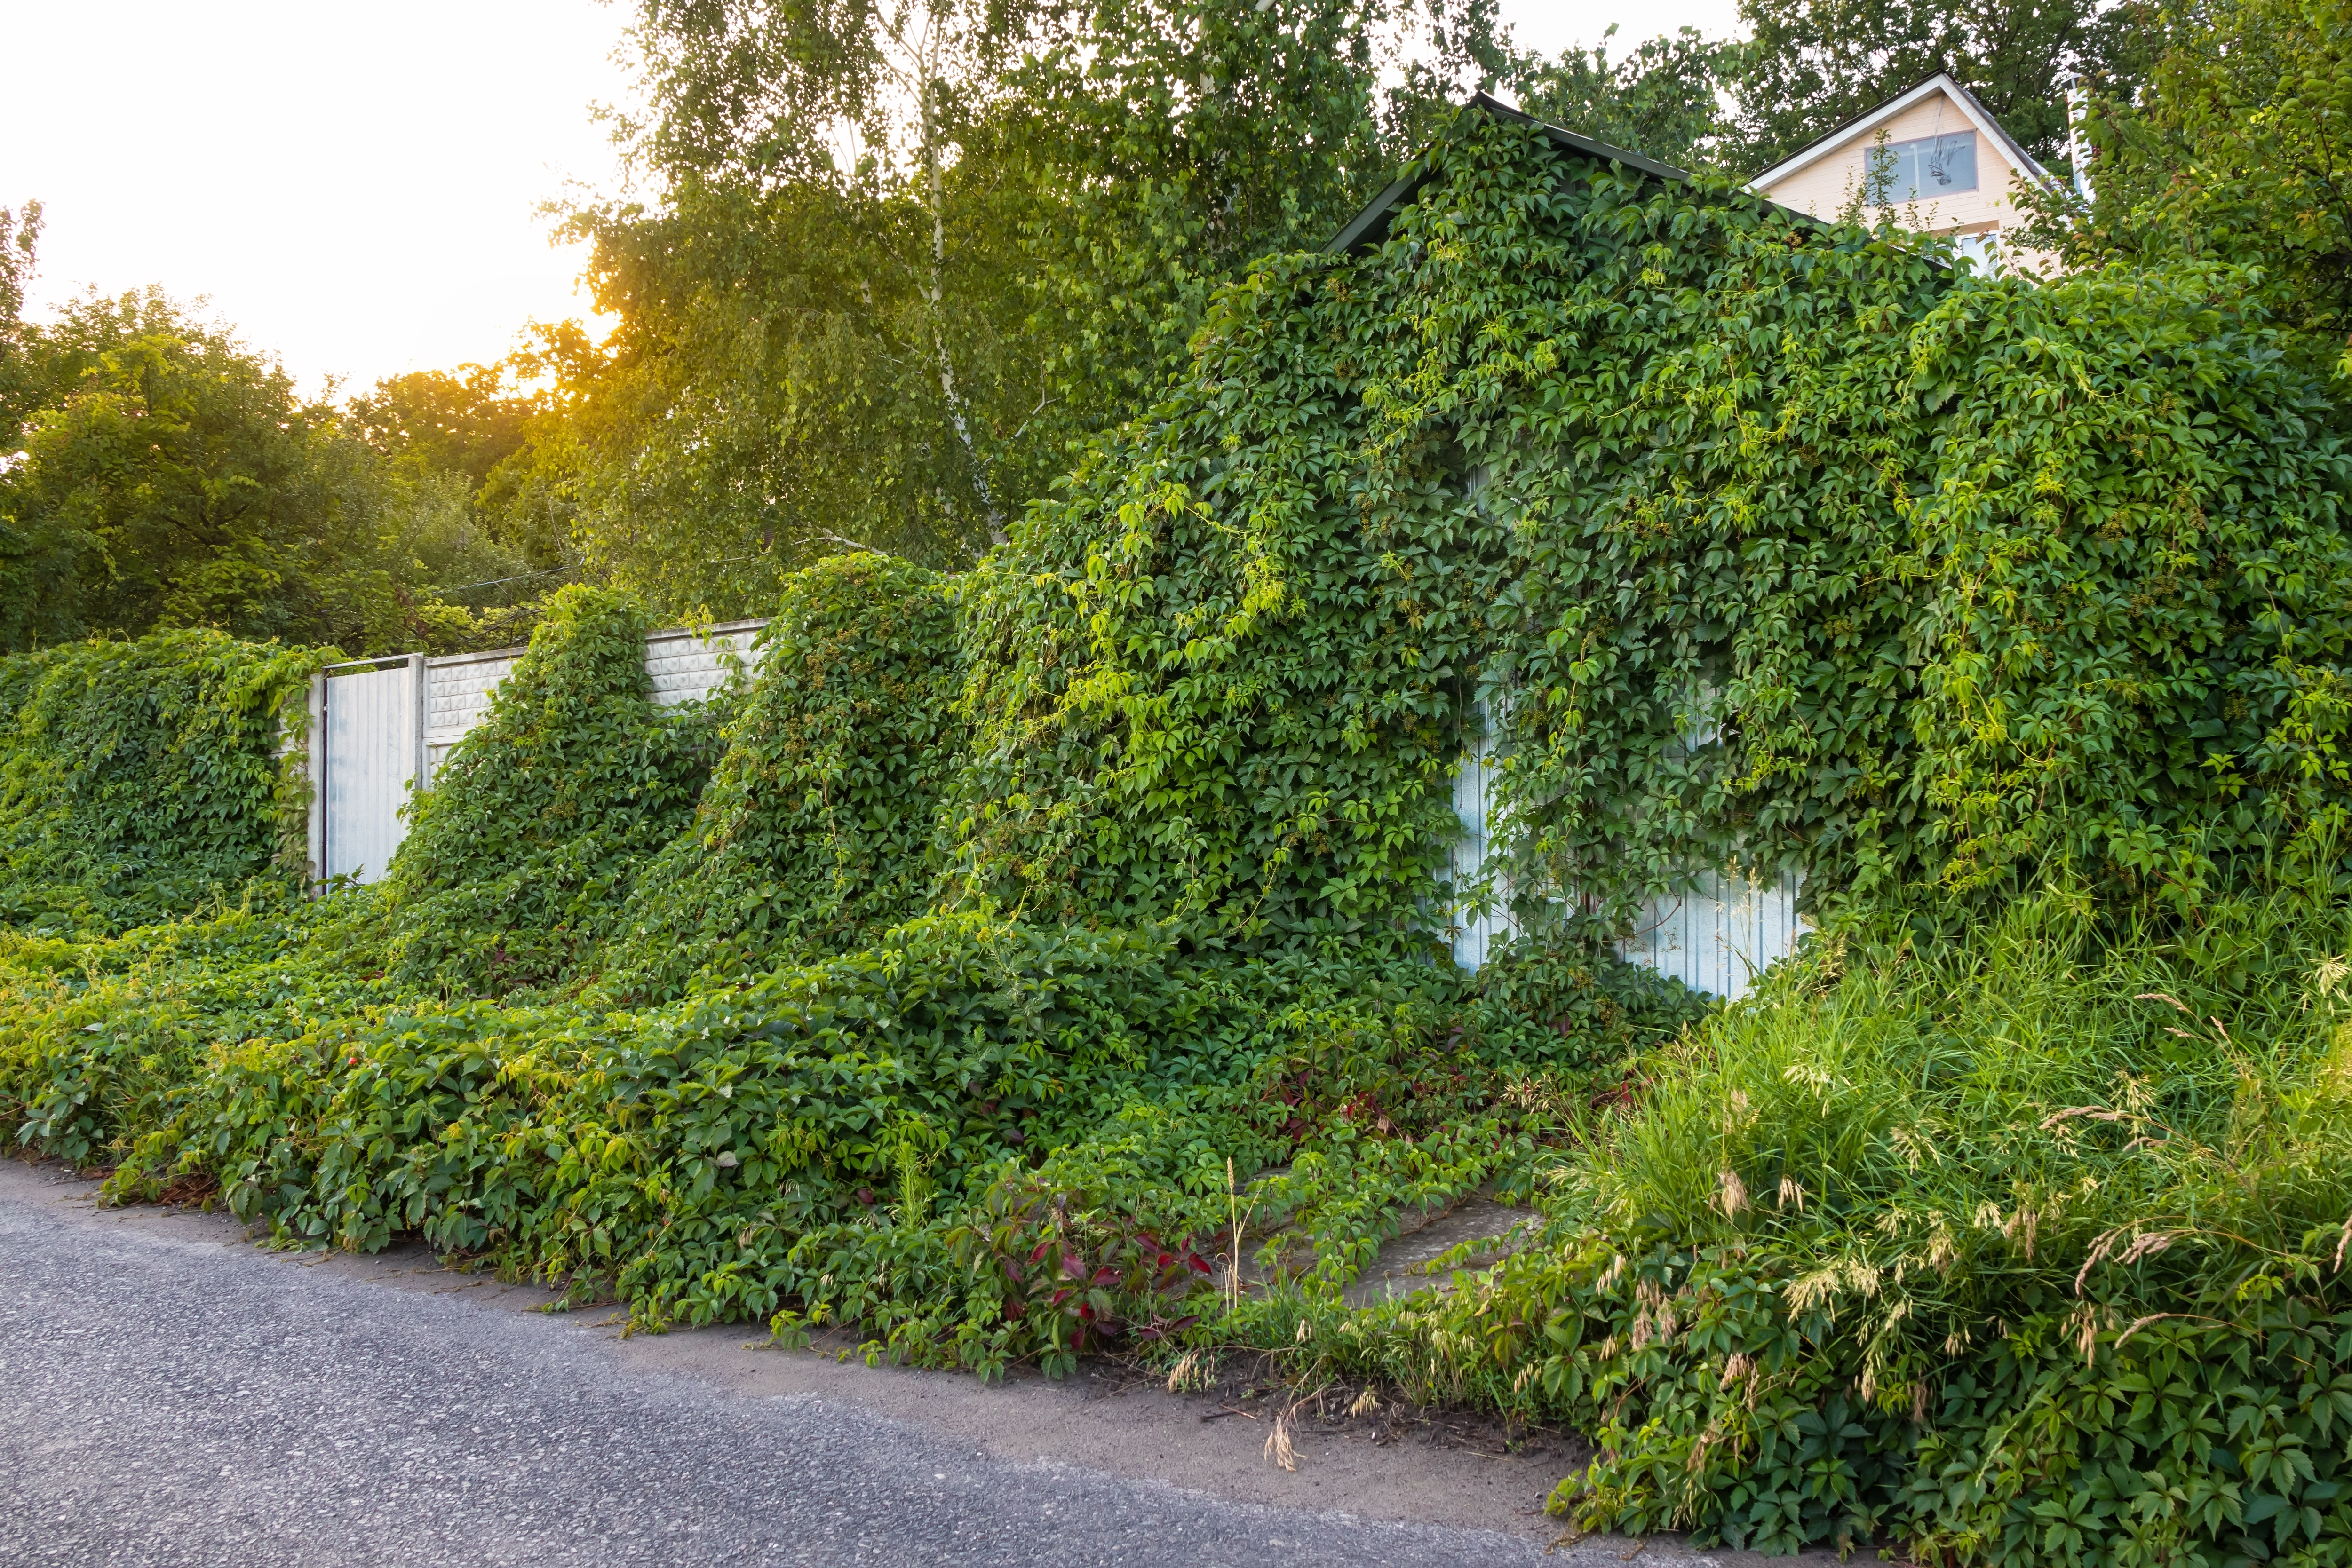 Wild grapes on the fence and garage | Source: Shutterstock.com